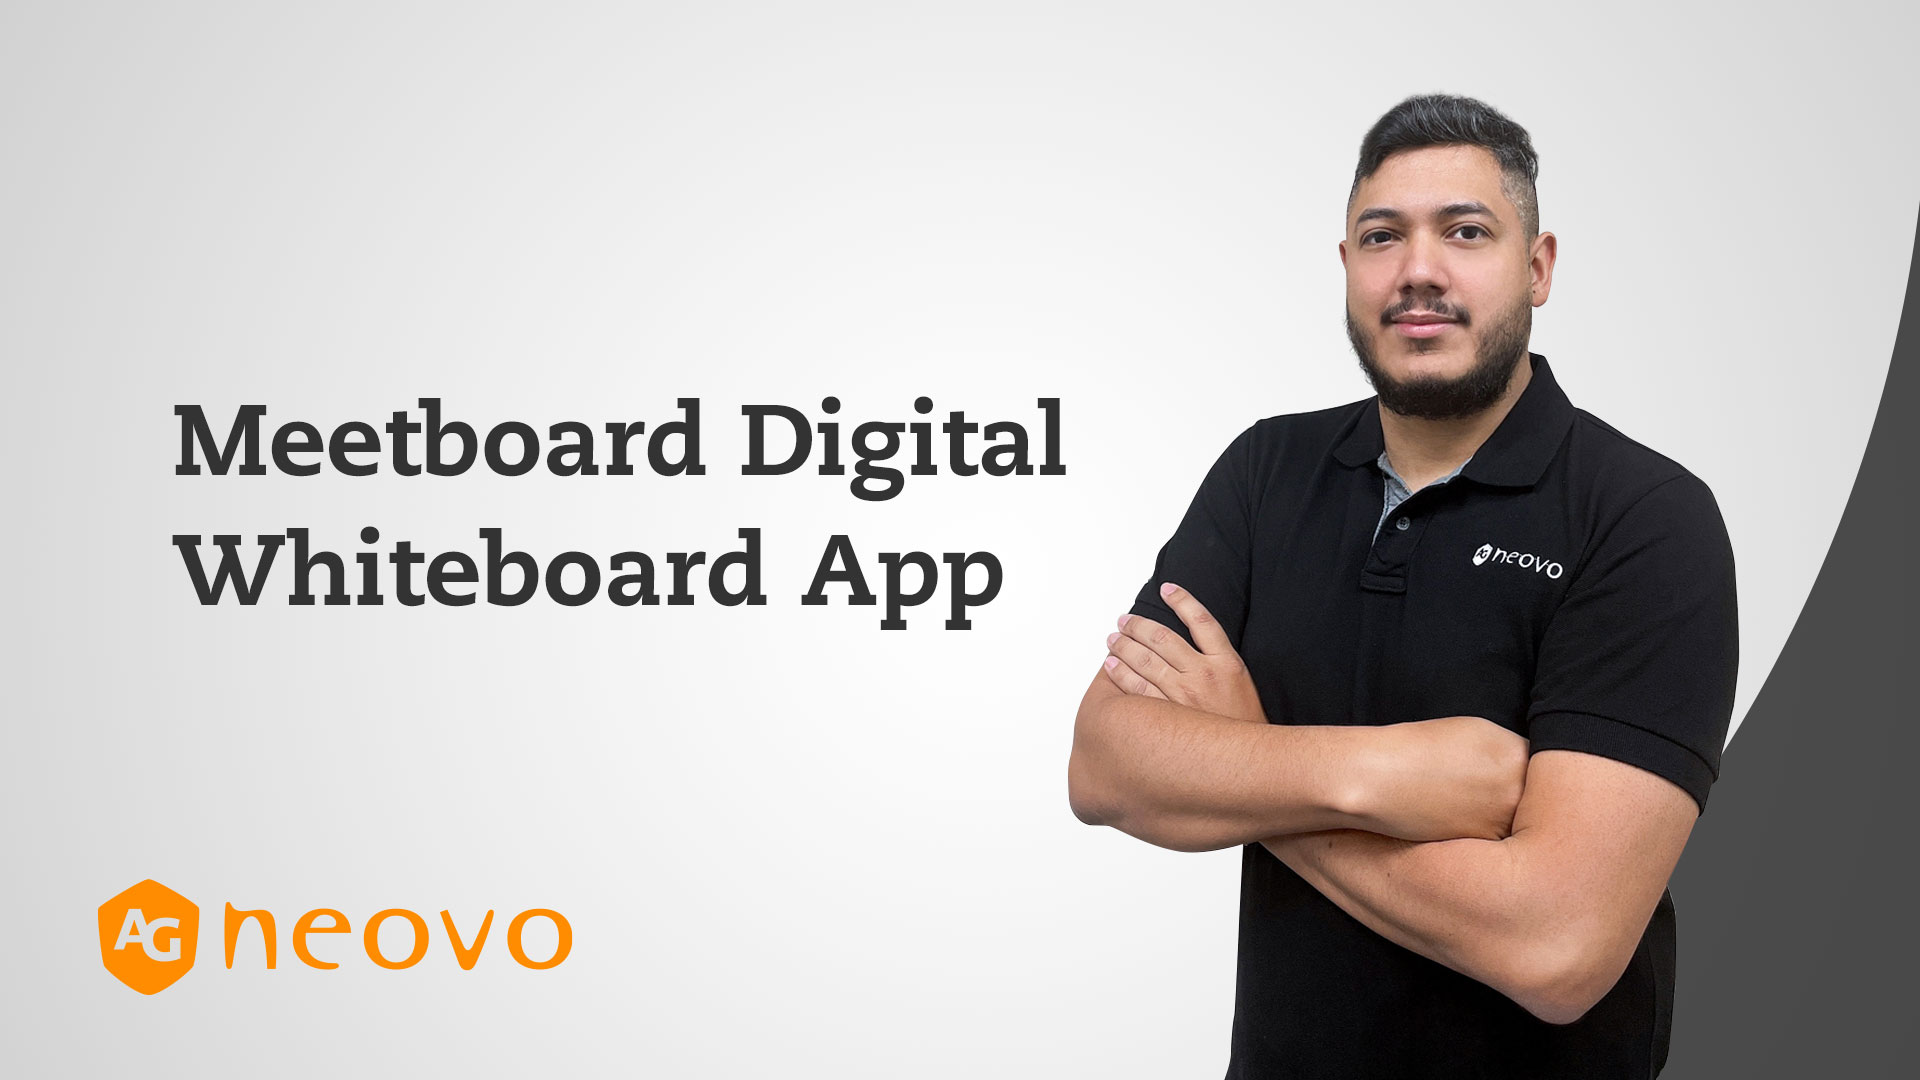 Tips: How to Use Digital Whiteboard on Meetboard Interactive Display